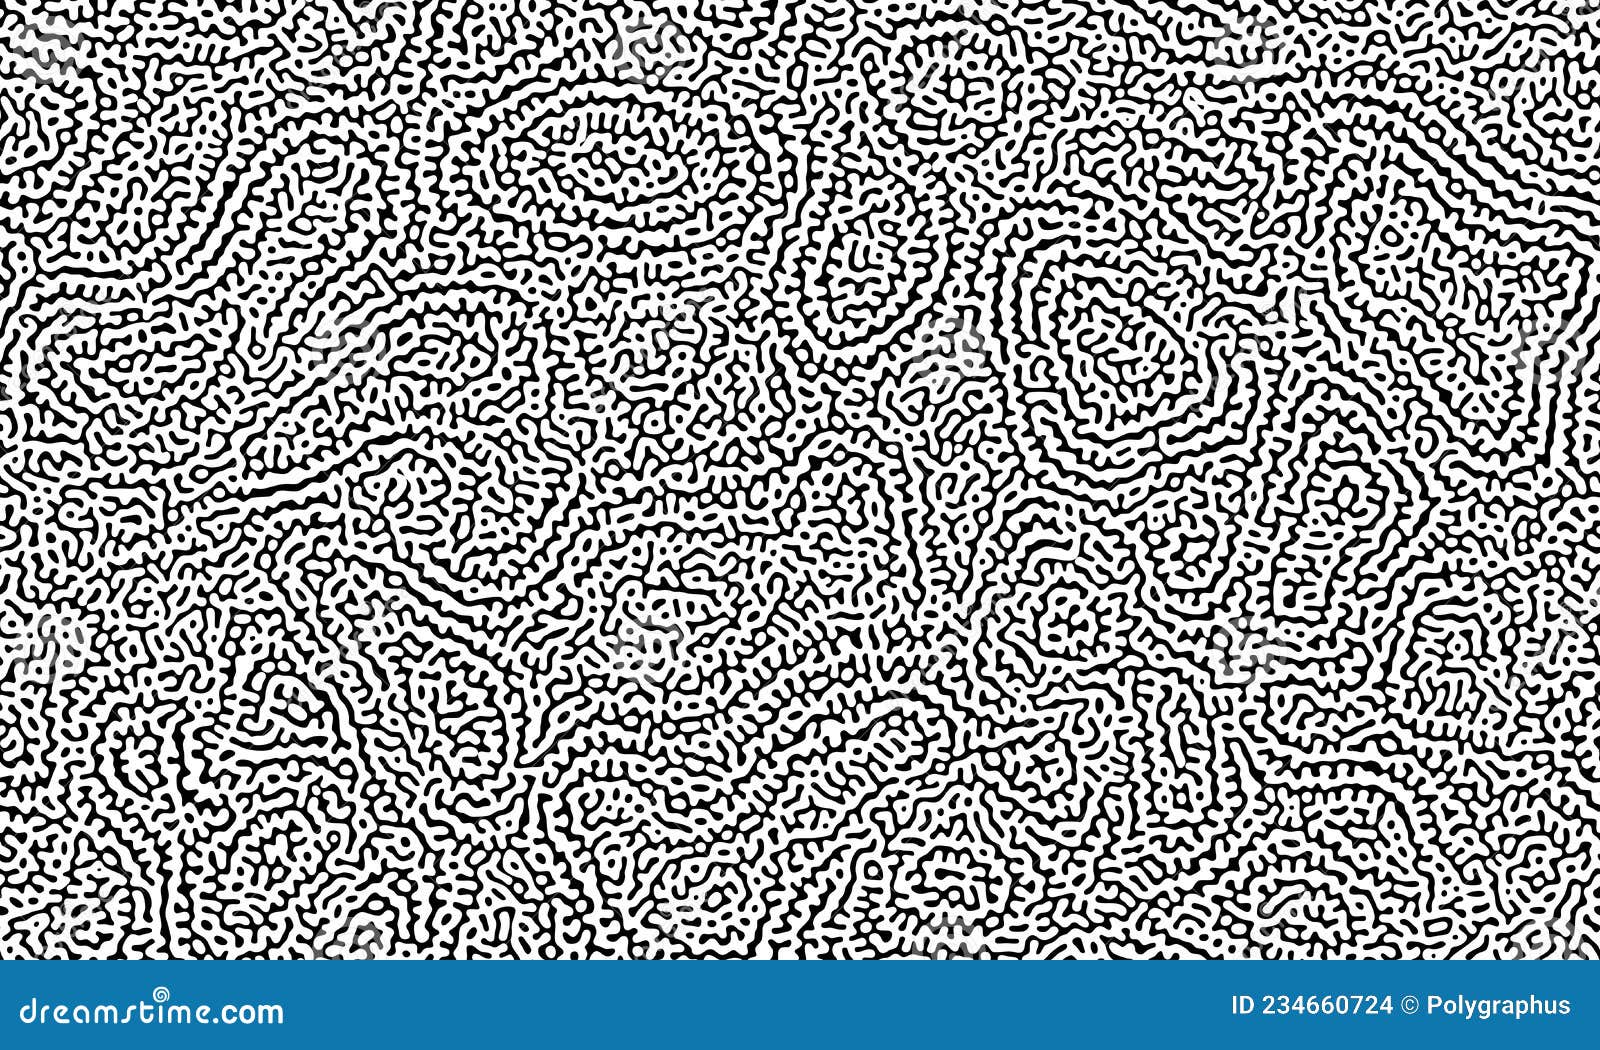 topographic turing seamless pattern. abstract black and white striped background